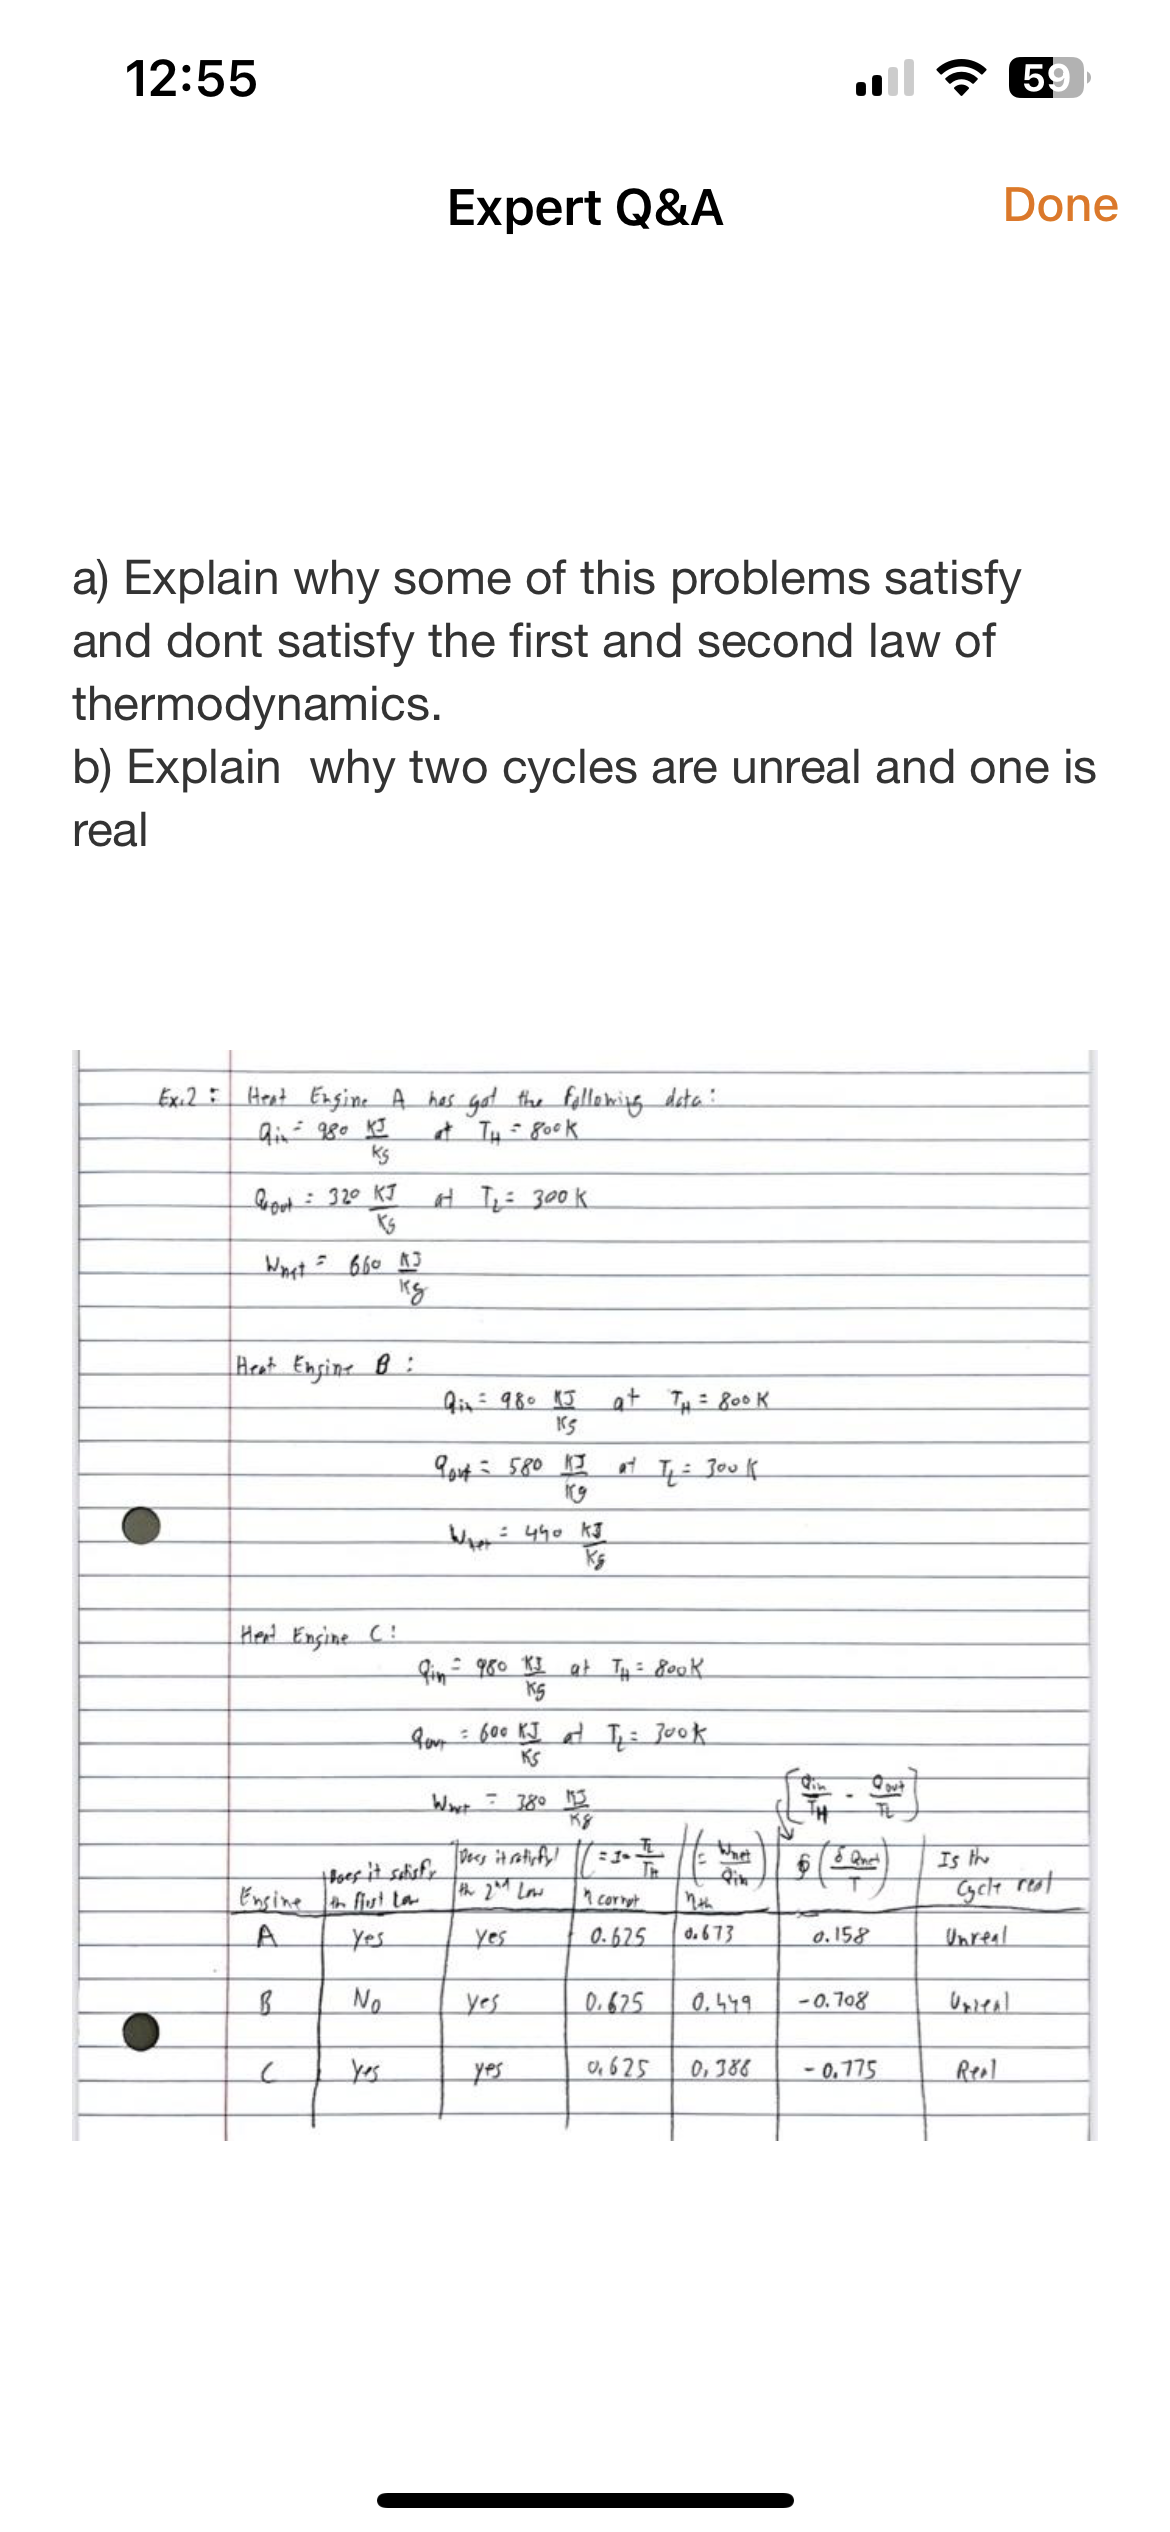 12:55
Ex.2:
a) Explain why some of this problems satisfy
and dont satisfy the first and second law of
thermodynamics.
b) Explain why two cycles are unreal and one is
real
Heat Engine A has got the following data:
Qi 980 KI
at TH= 800K
Ks
Groot 320 KJ
Ks
What= 660 AJ
kg
Heat Engine B:
Expert Q&A
Hent Engine C
Ensineth first la
A
B
No
at T₁ = 300k
Qin = 980 KJ
KS
9out= 580 KJ
W₁ 440 KJ
Ks
Qin = 980 KJ at T₁ = Book
KS
Wat = 380 113
K8
= 600 KJ at T₁ = Jook
KS
Dess it rotisfy!
the 2nd Low
yes
at TH = 800 K
yes
at T₁ = 300k
yes
= 1+
n corret
0.625
0.625
nth
0.673
6
0,625 0,388
& Quet
0.158
0.449 -0.708
Qout
TL
-0.775
59
59
Done
Is the
Cycle rest
Unreal
Unreal
Real